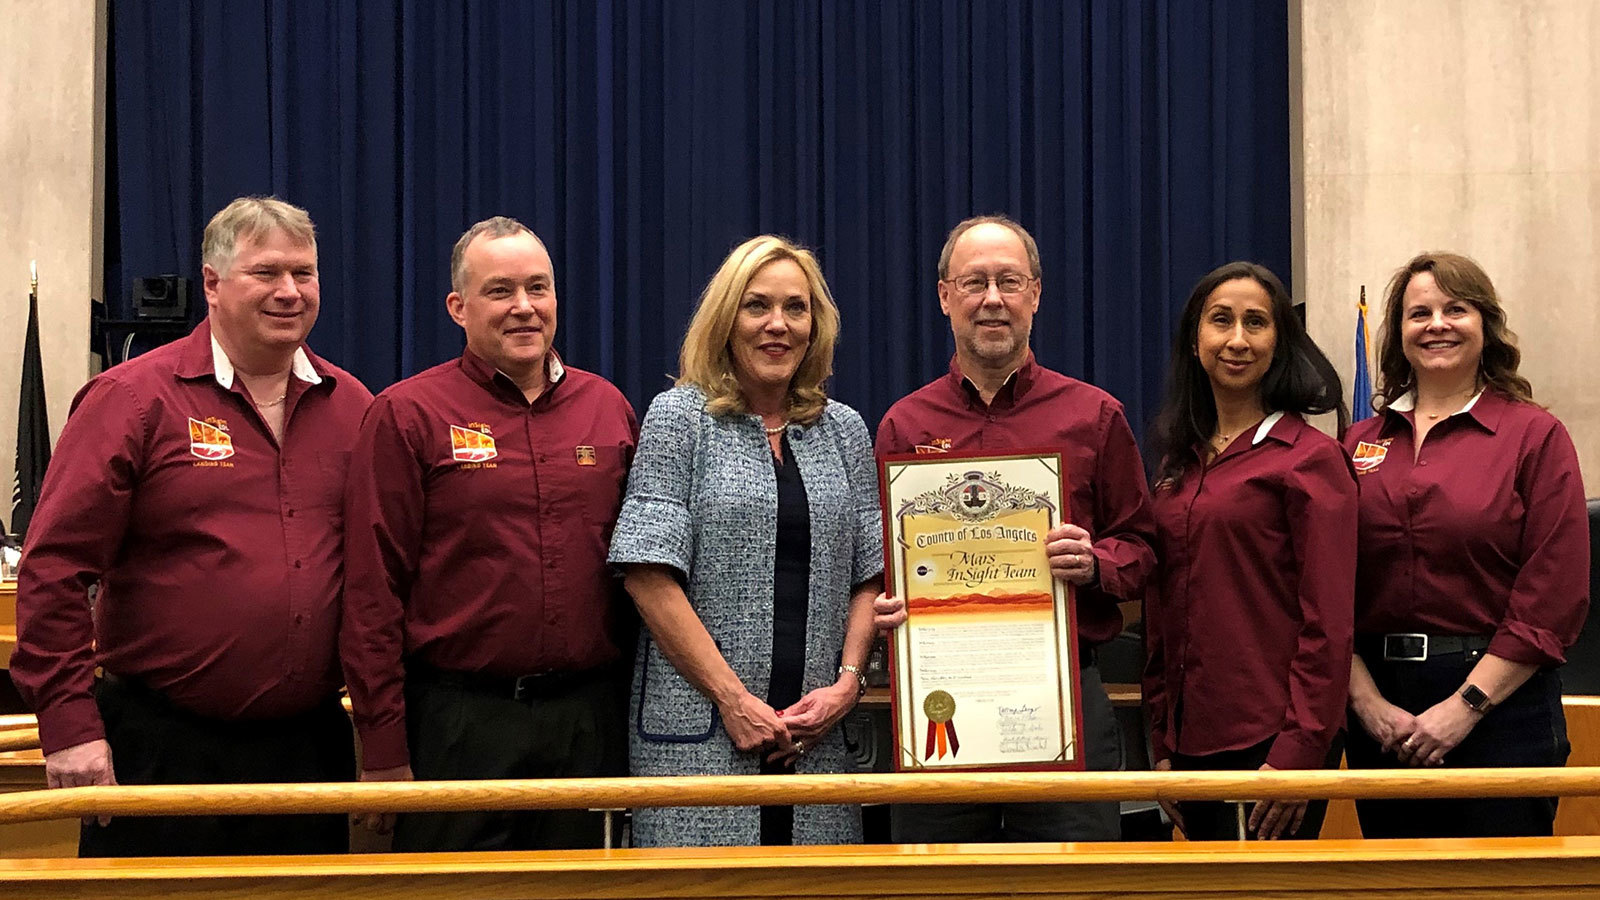 L.A. County Supervisor Kathryn Barger (center) presented the proclamation to the InSight team, represented by (left to right) Chuck Scott, Tom Hoffman, Bruce Banerdt, Pilar Leon and Christine Szalai.